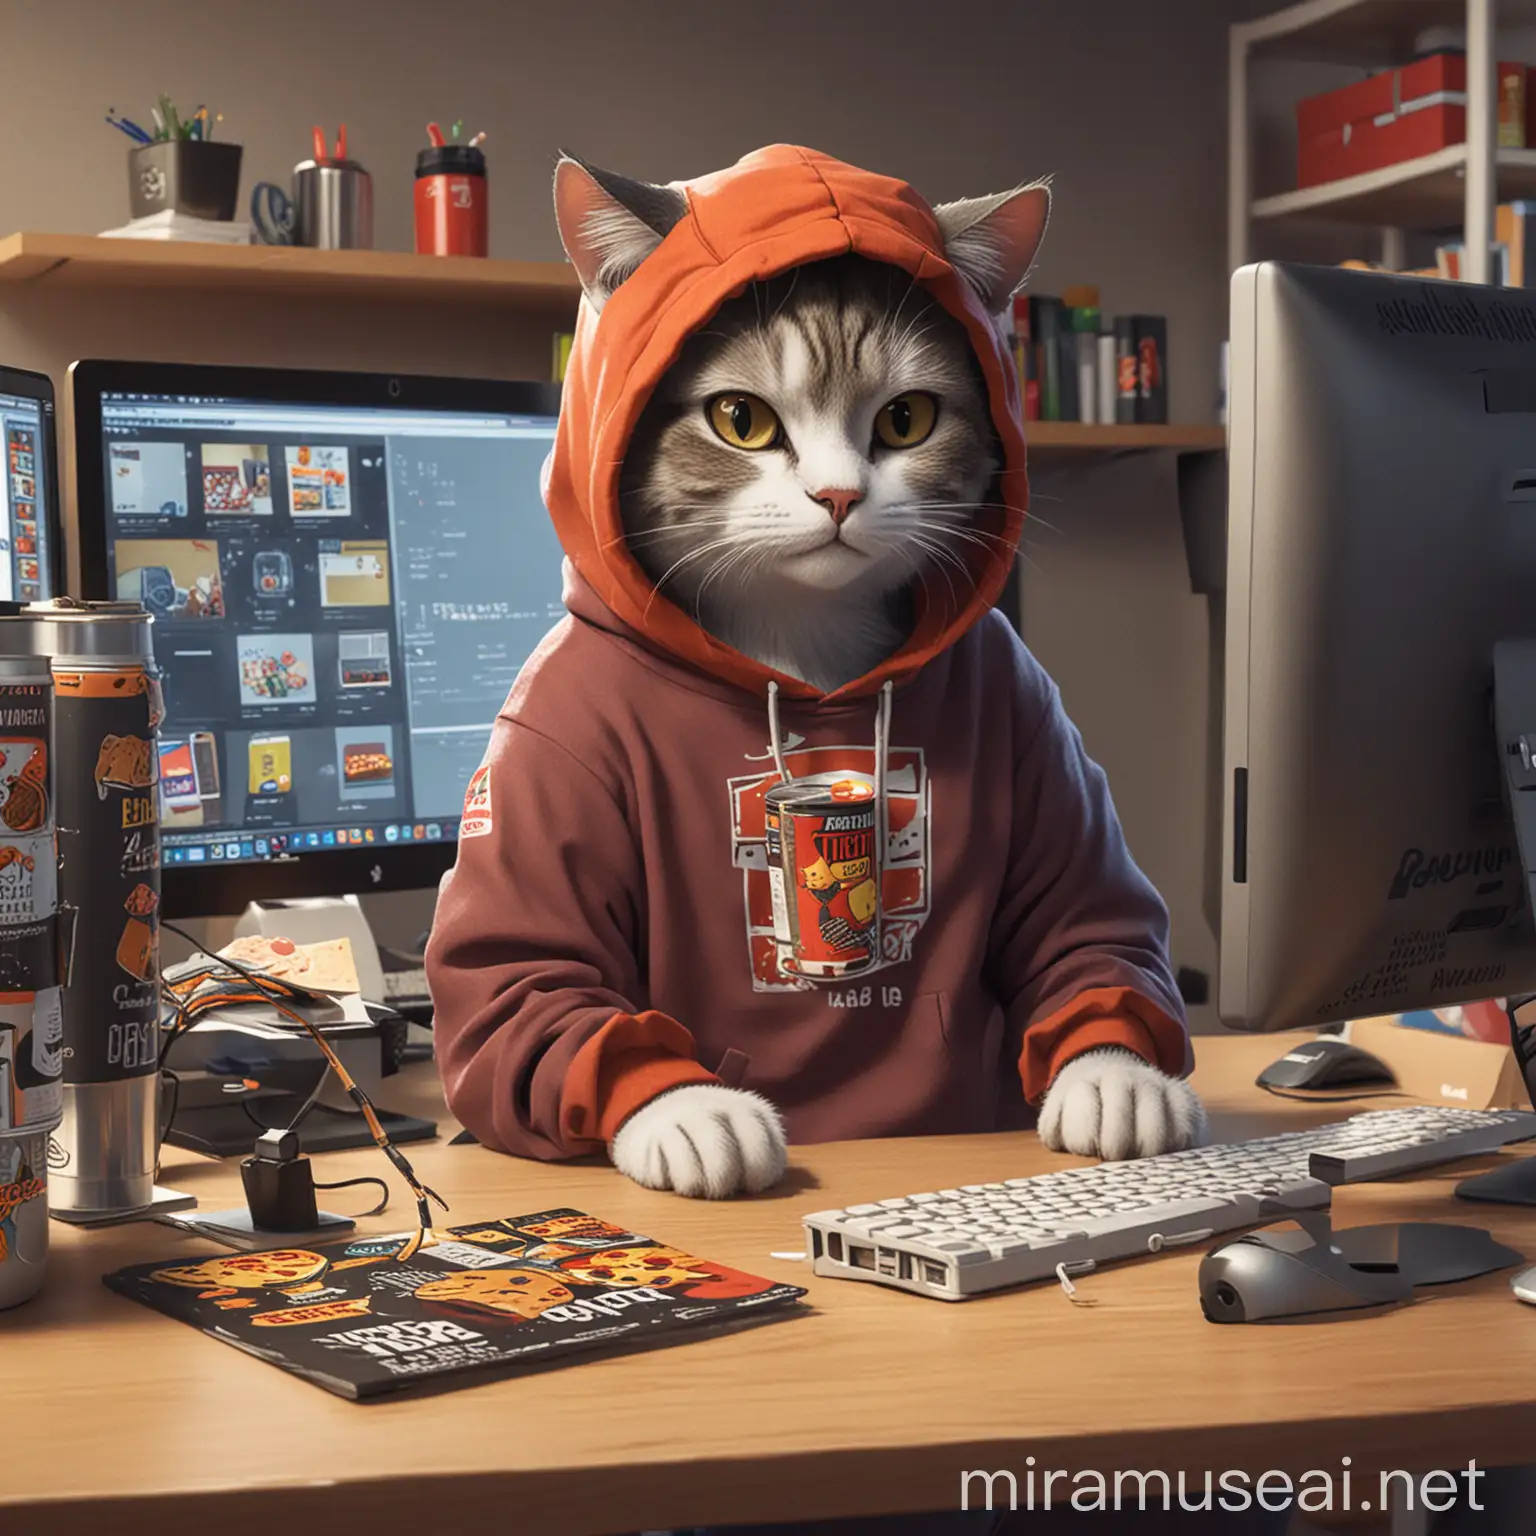 Cartoon Cat in Hoodie Working at Computer Desk with Pizza Boxes and Energy Drinks